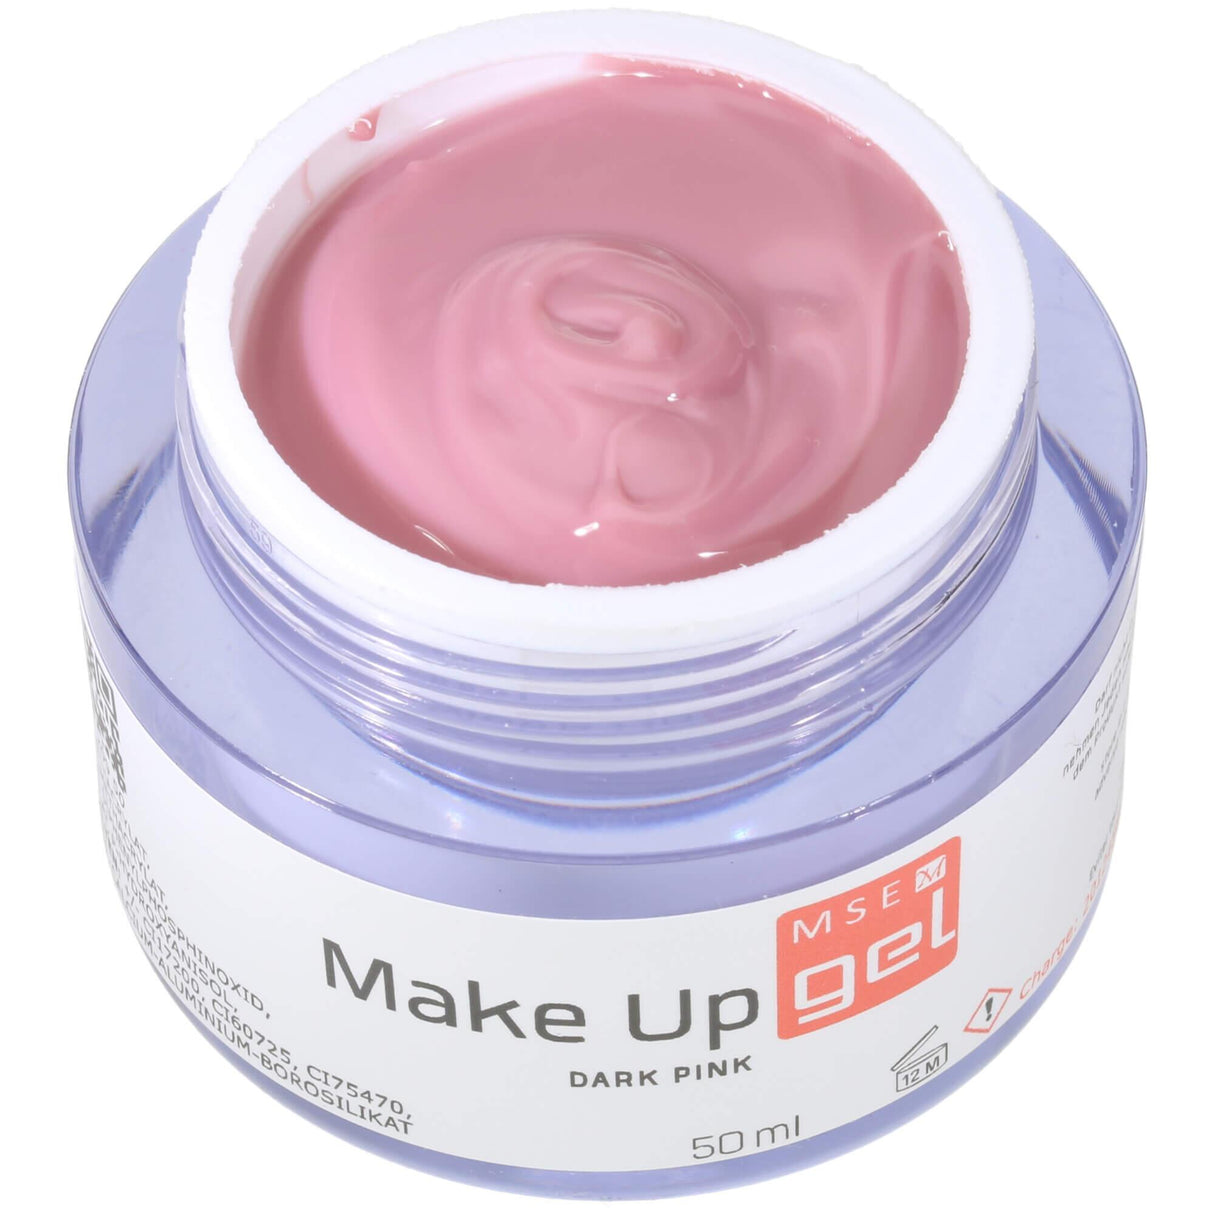 MSE Gel 209: Make Up Gel Dark Pink 50ml - MSE - The Beauty Company